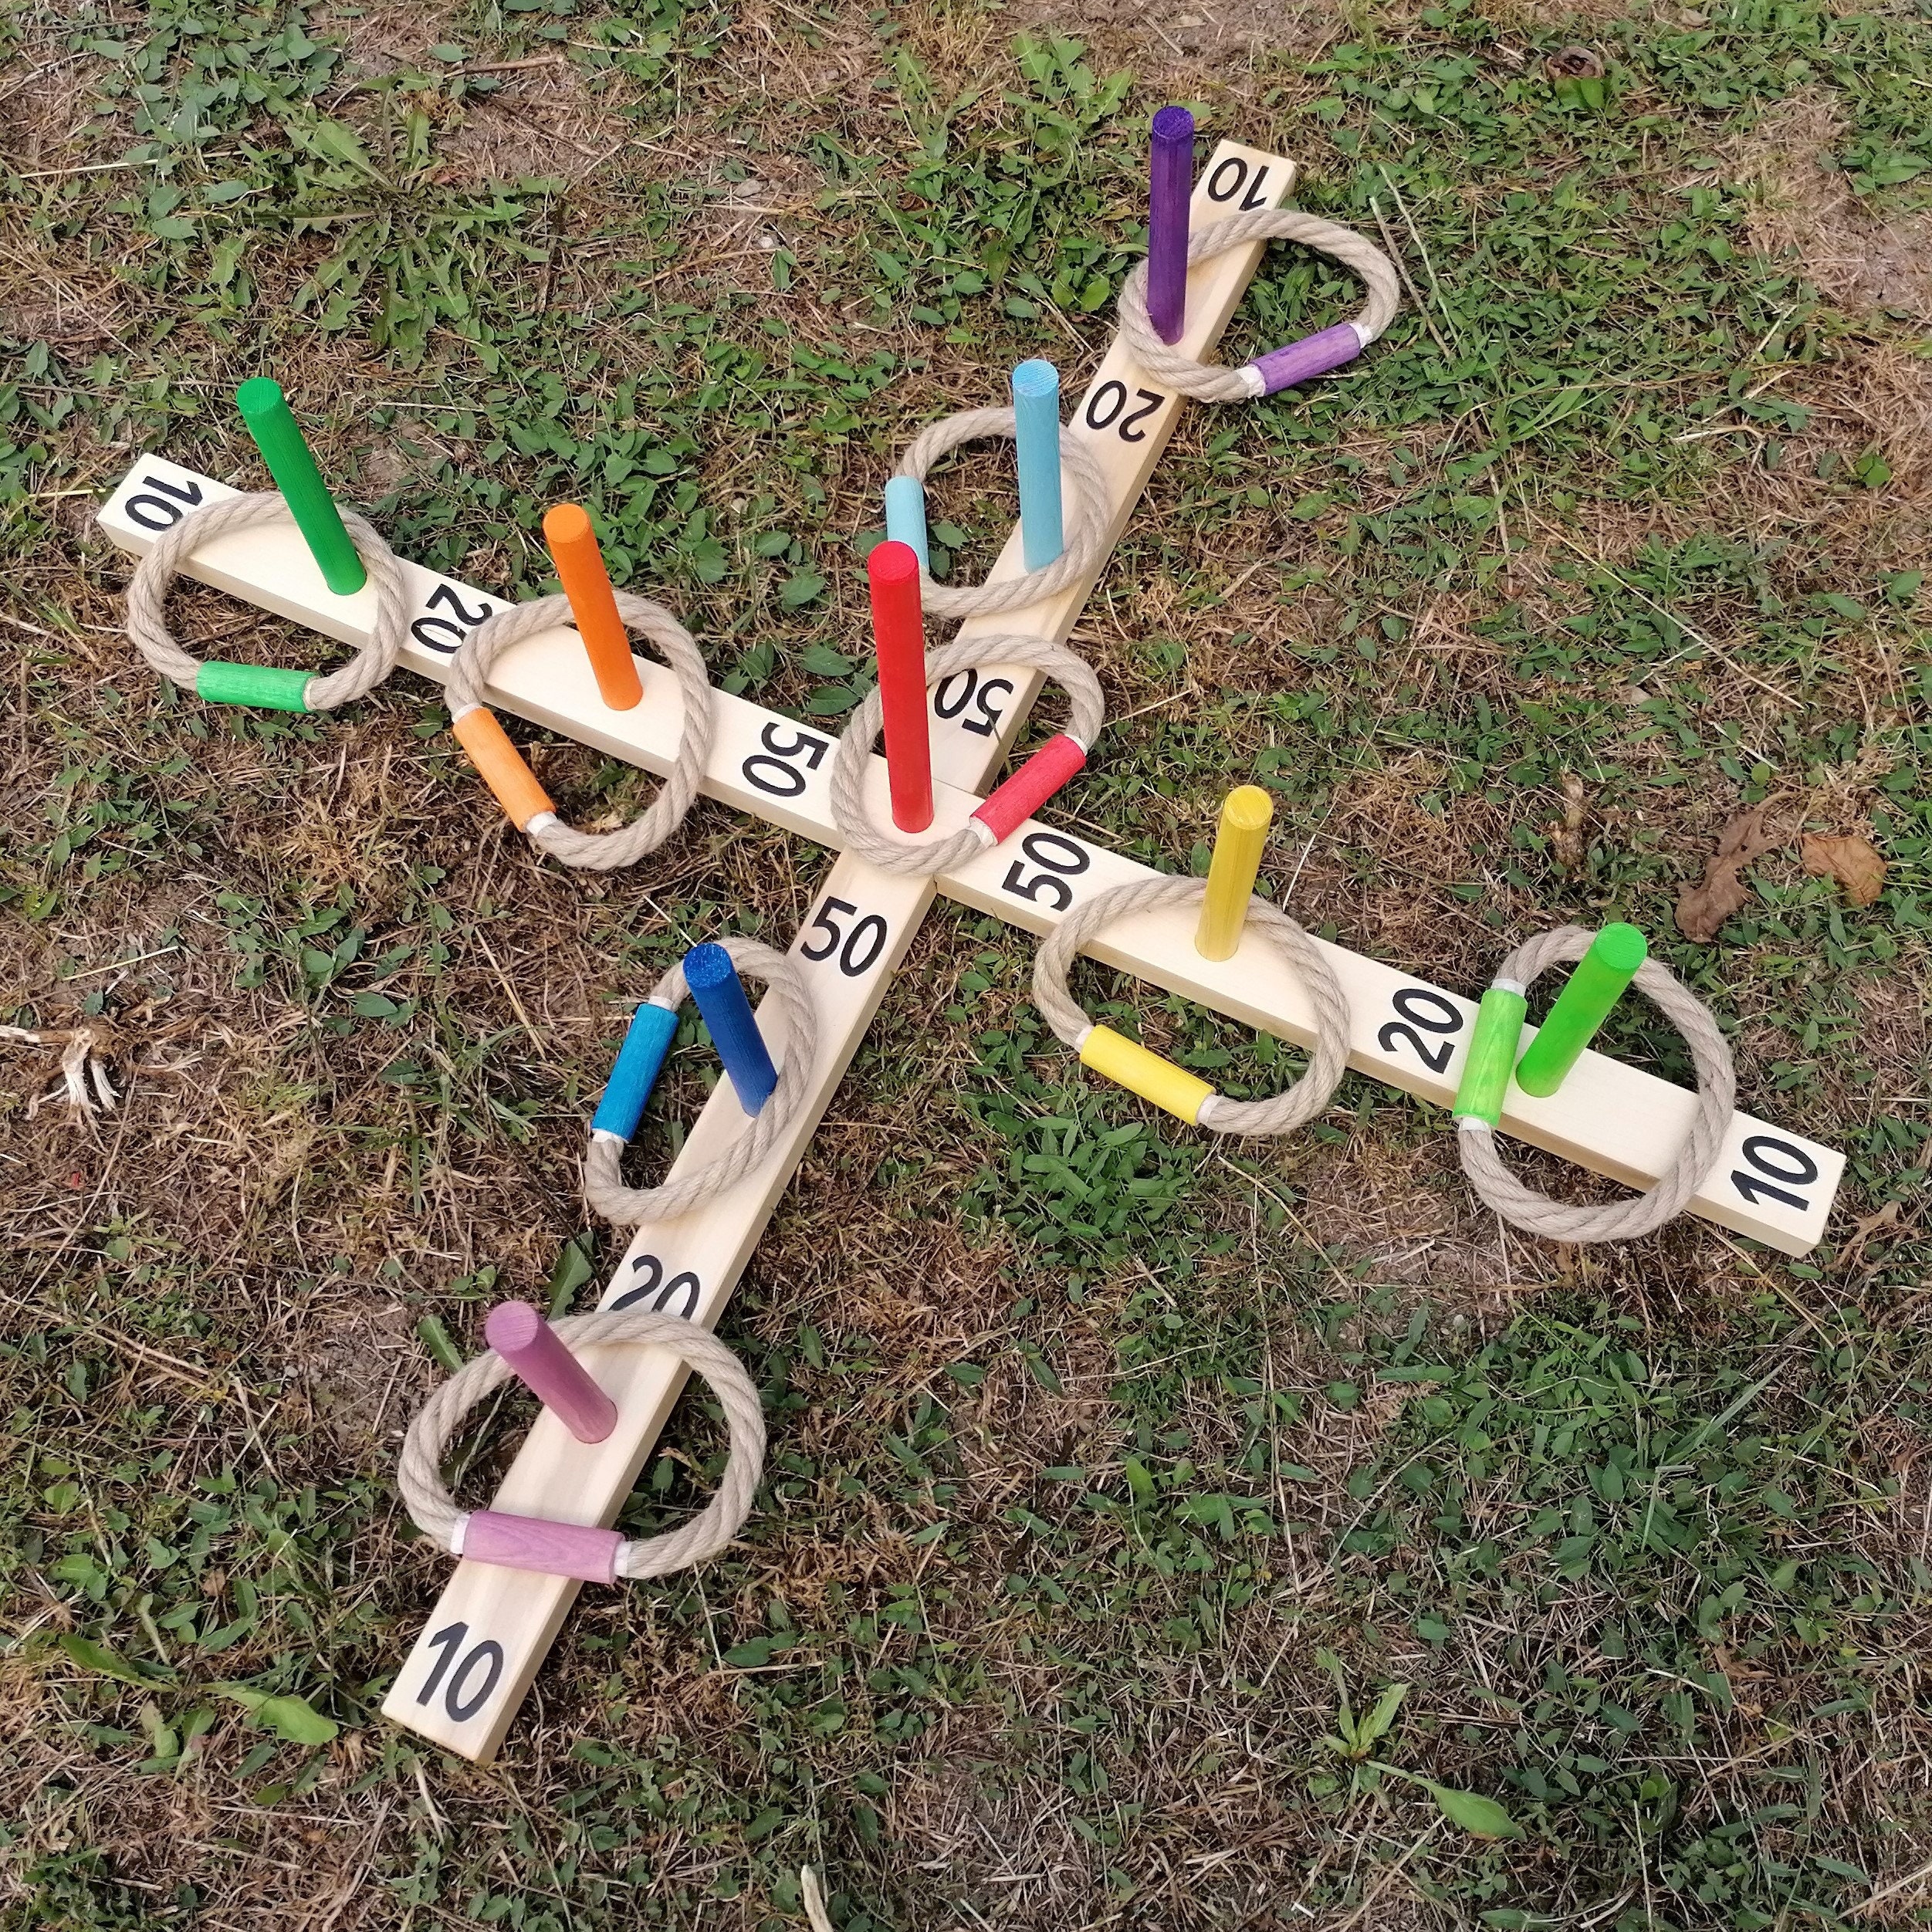 Rope Rings for Ring Toss Lawn Game Carnival Game Ring the 